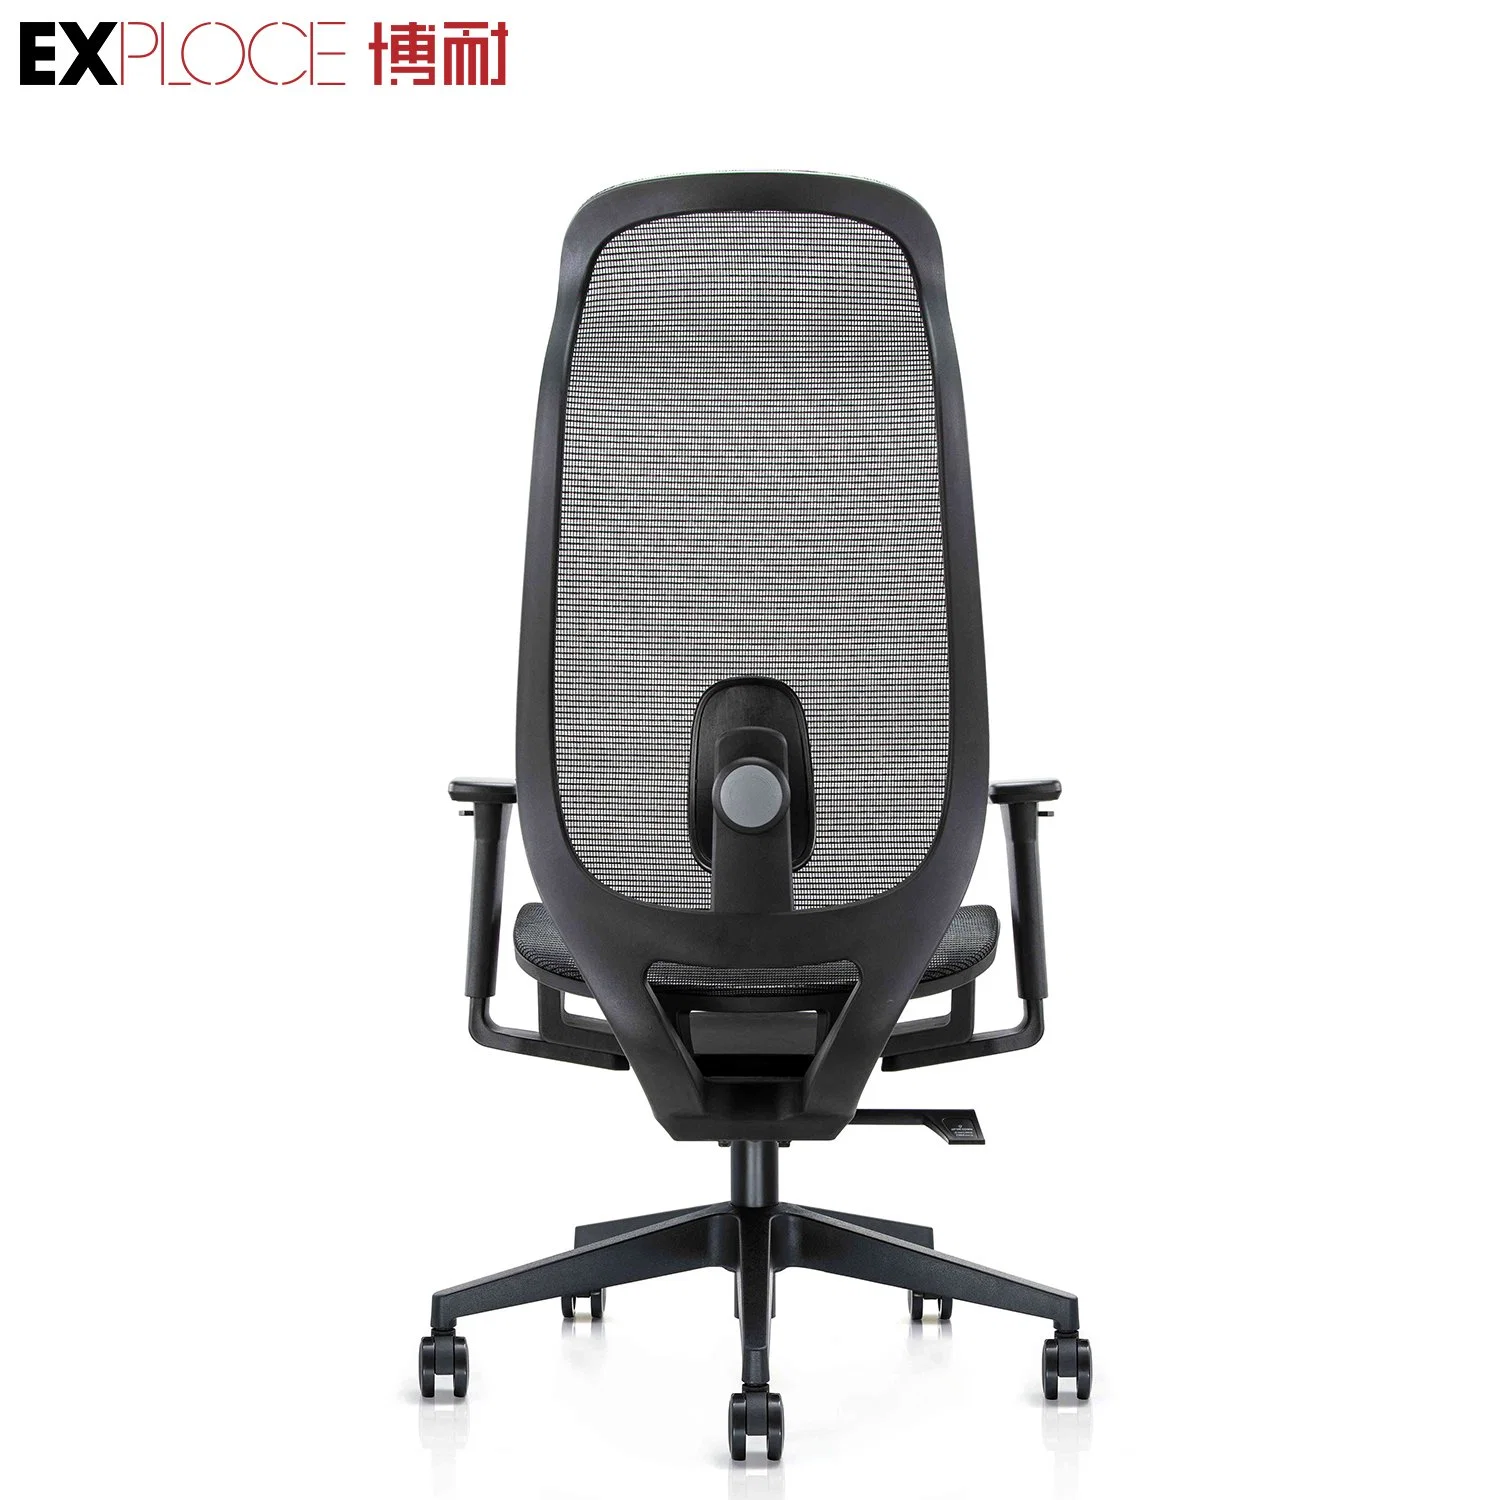 1 PCS for Min Order Approved BIFMA Gaming Chair Office Furniture